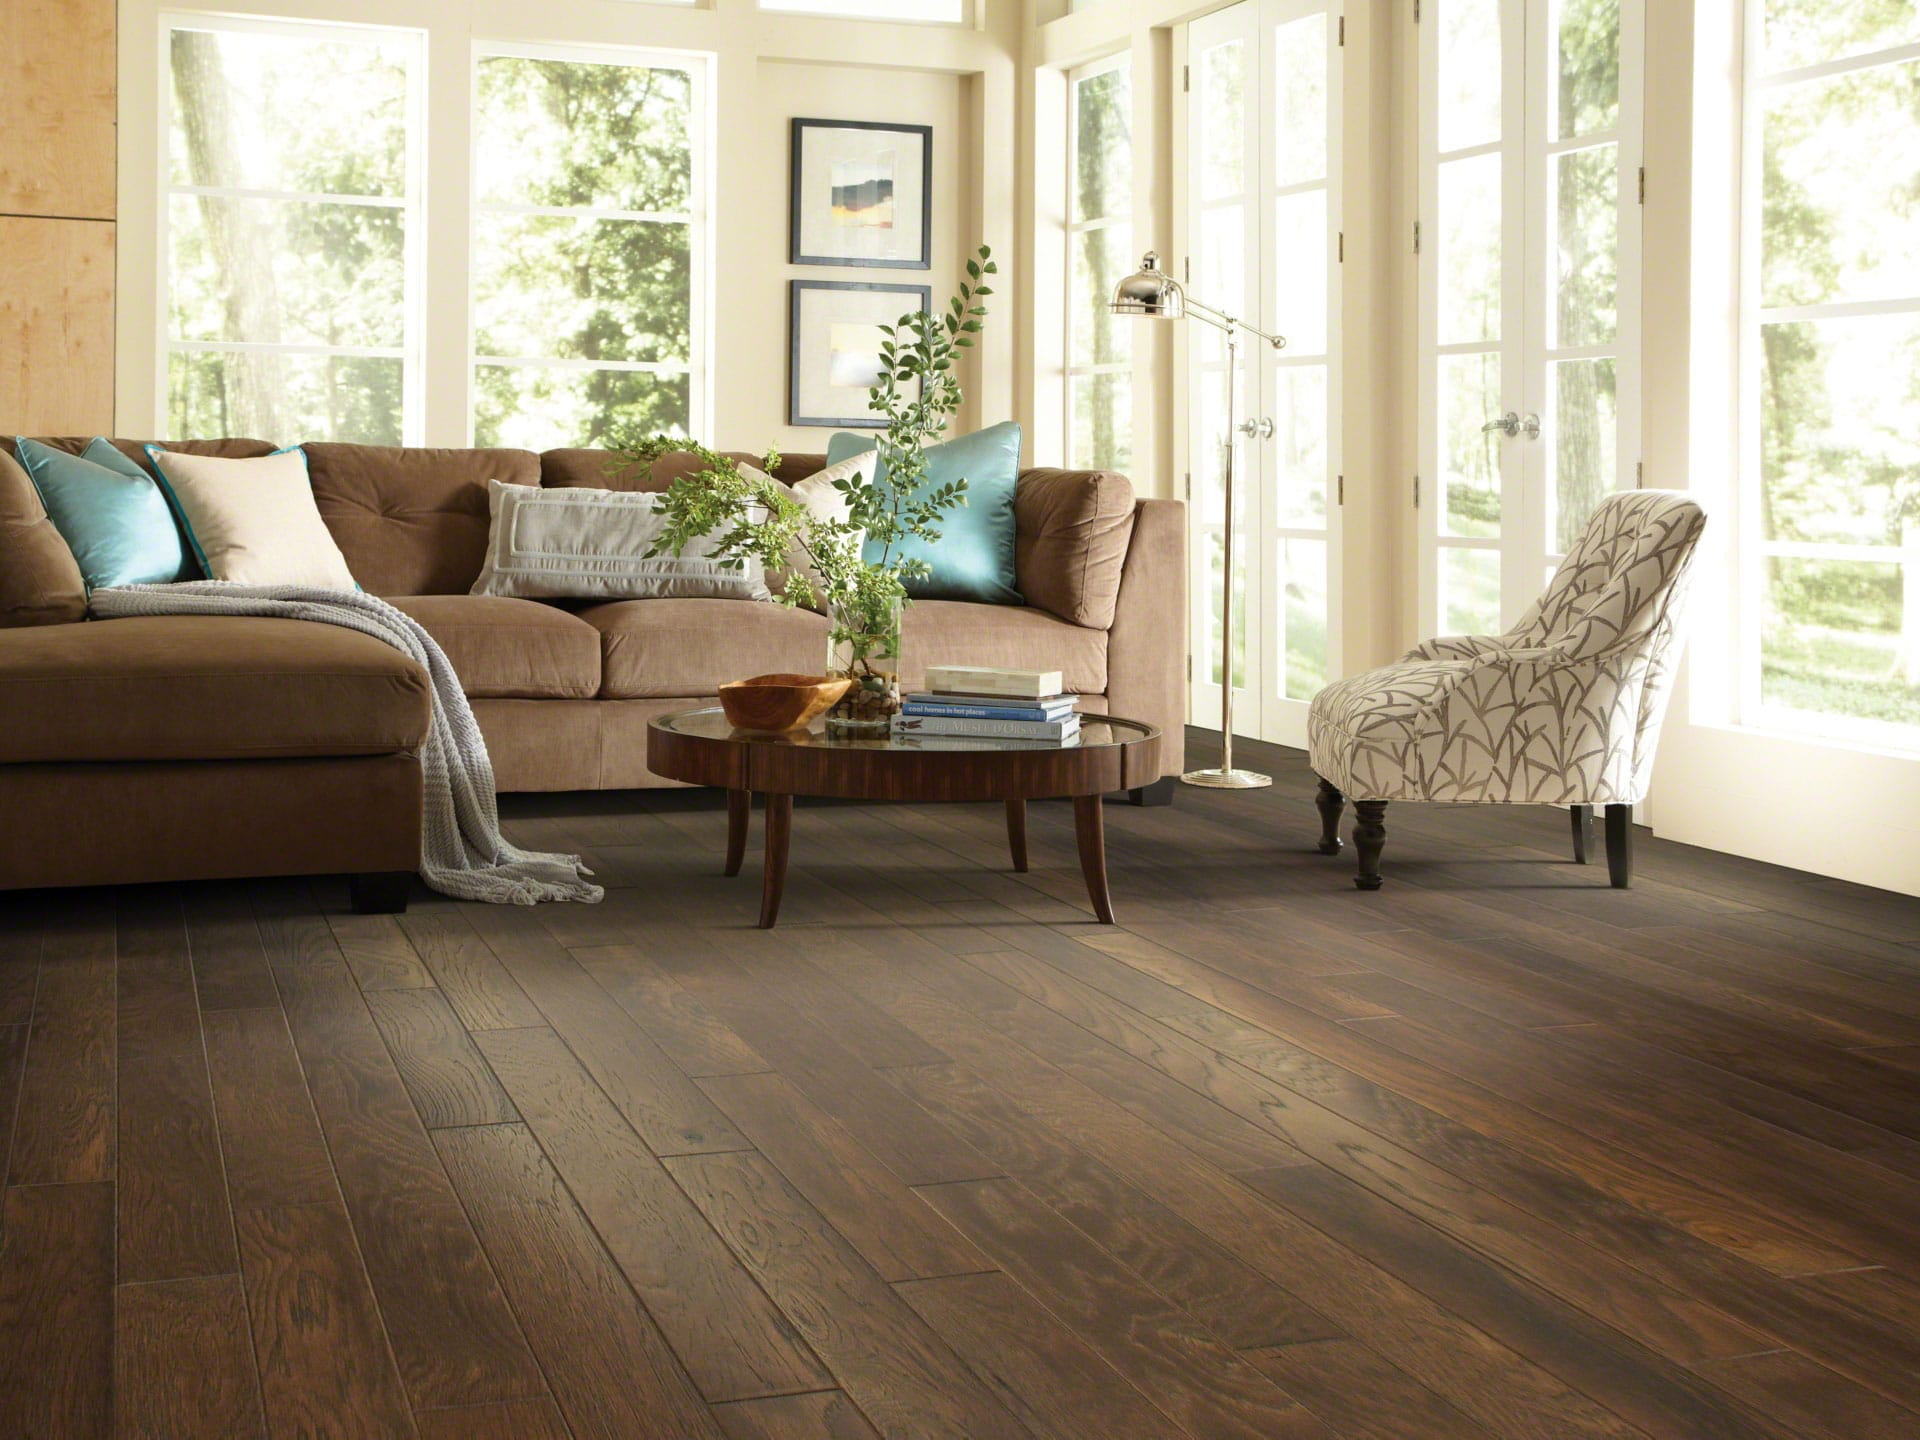 Shaw Floors featured image